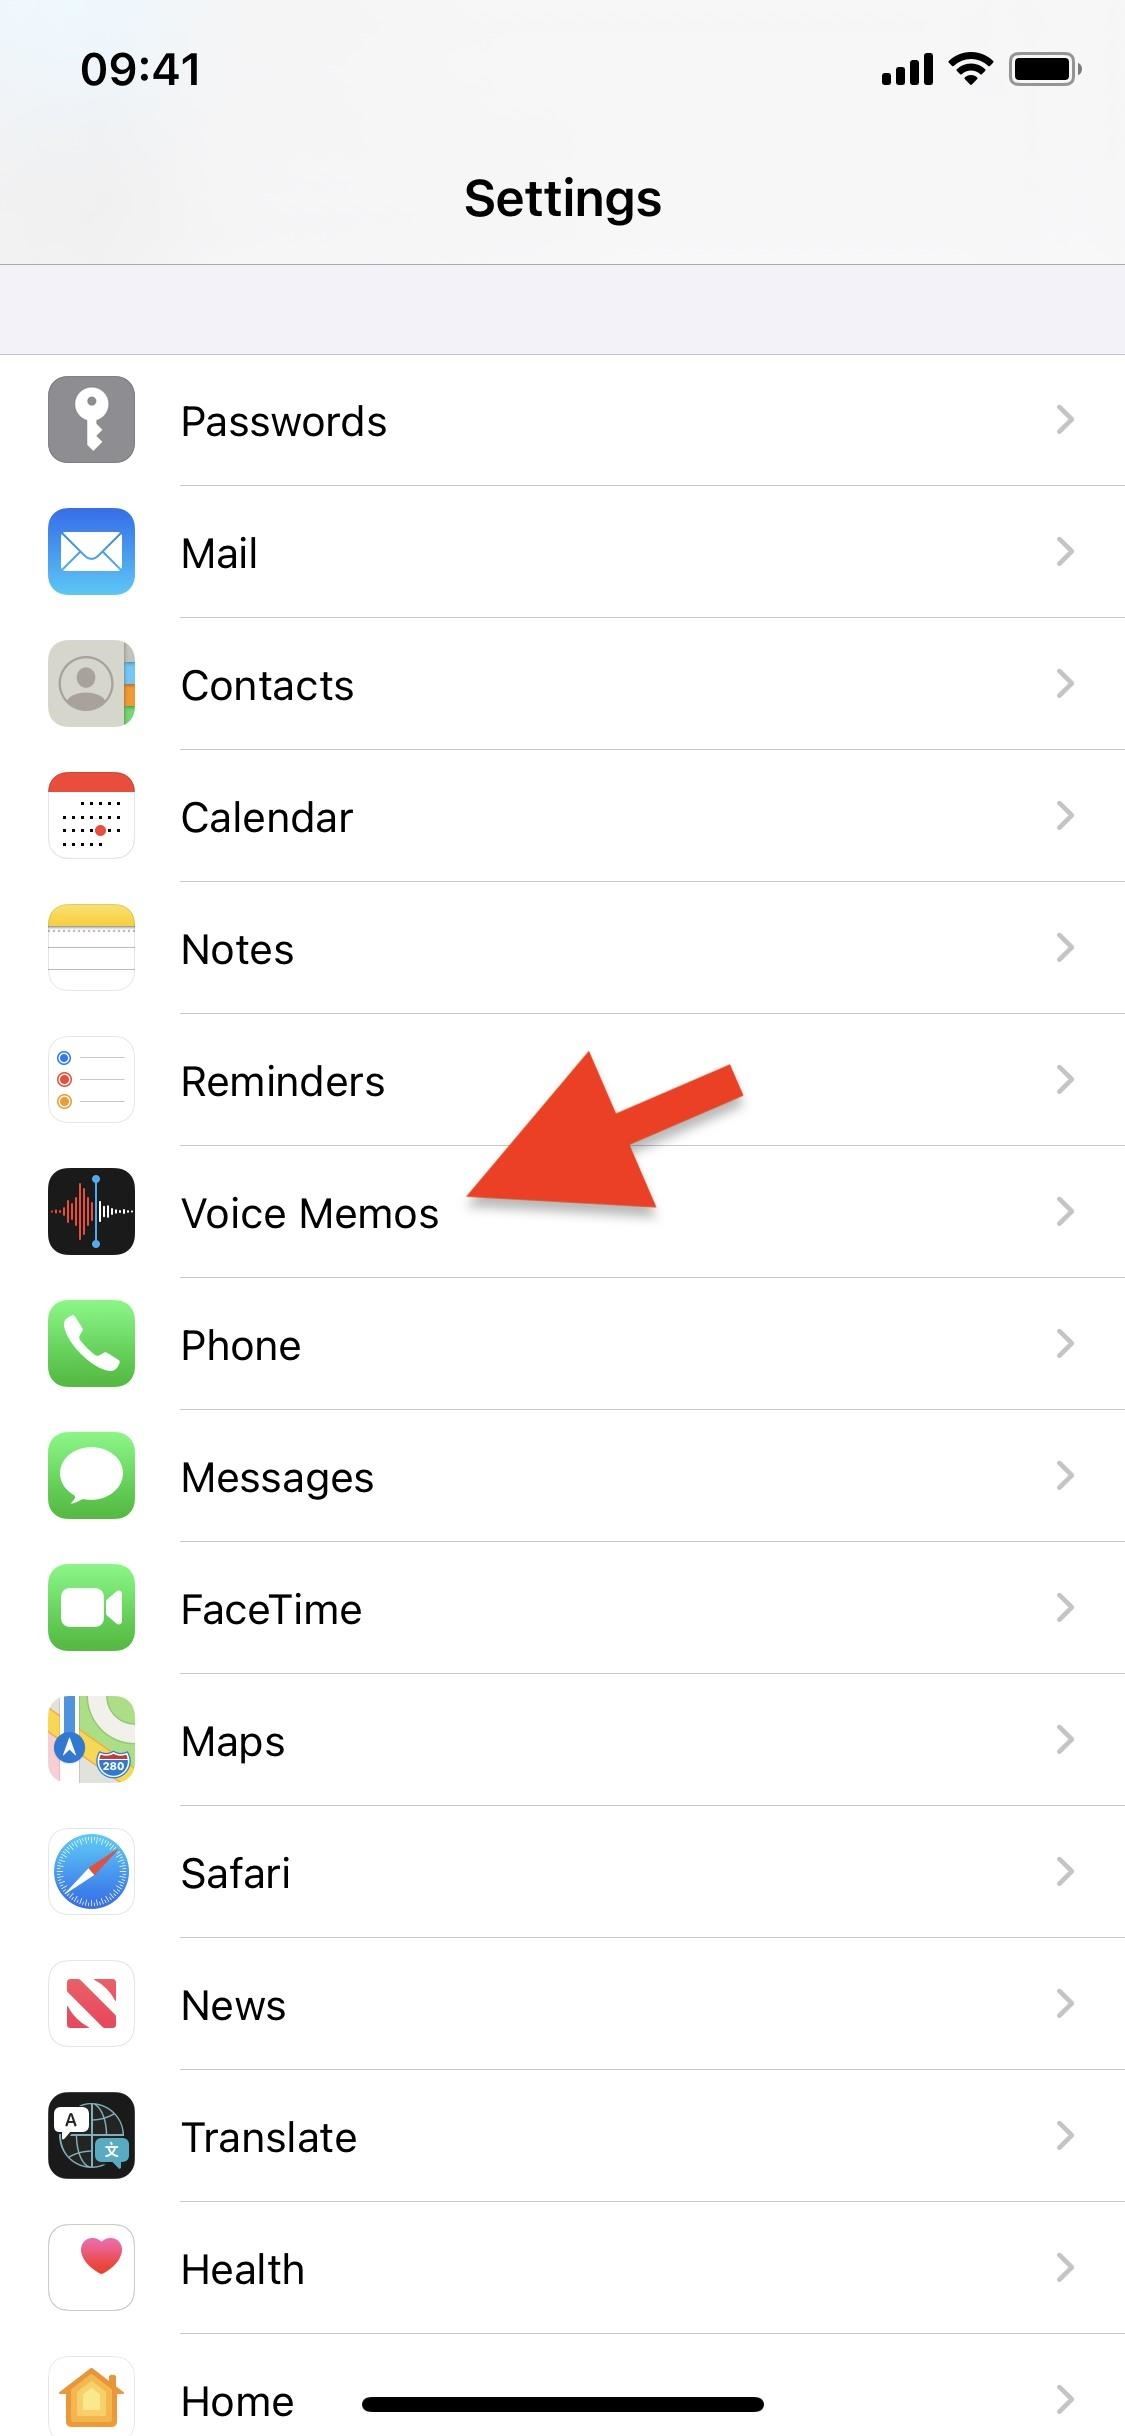 How to Improve Audio Quality in Voice Memos on Your iPhone to Get Better-Sounding Files